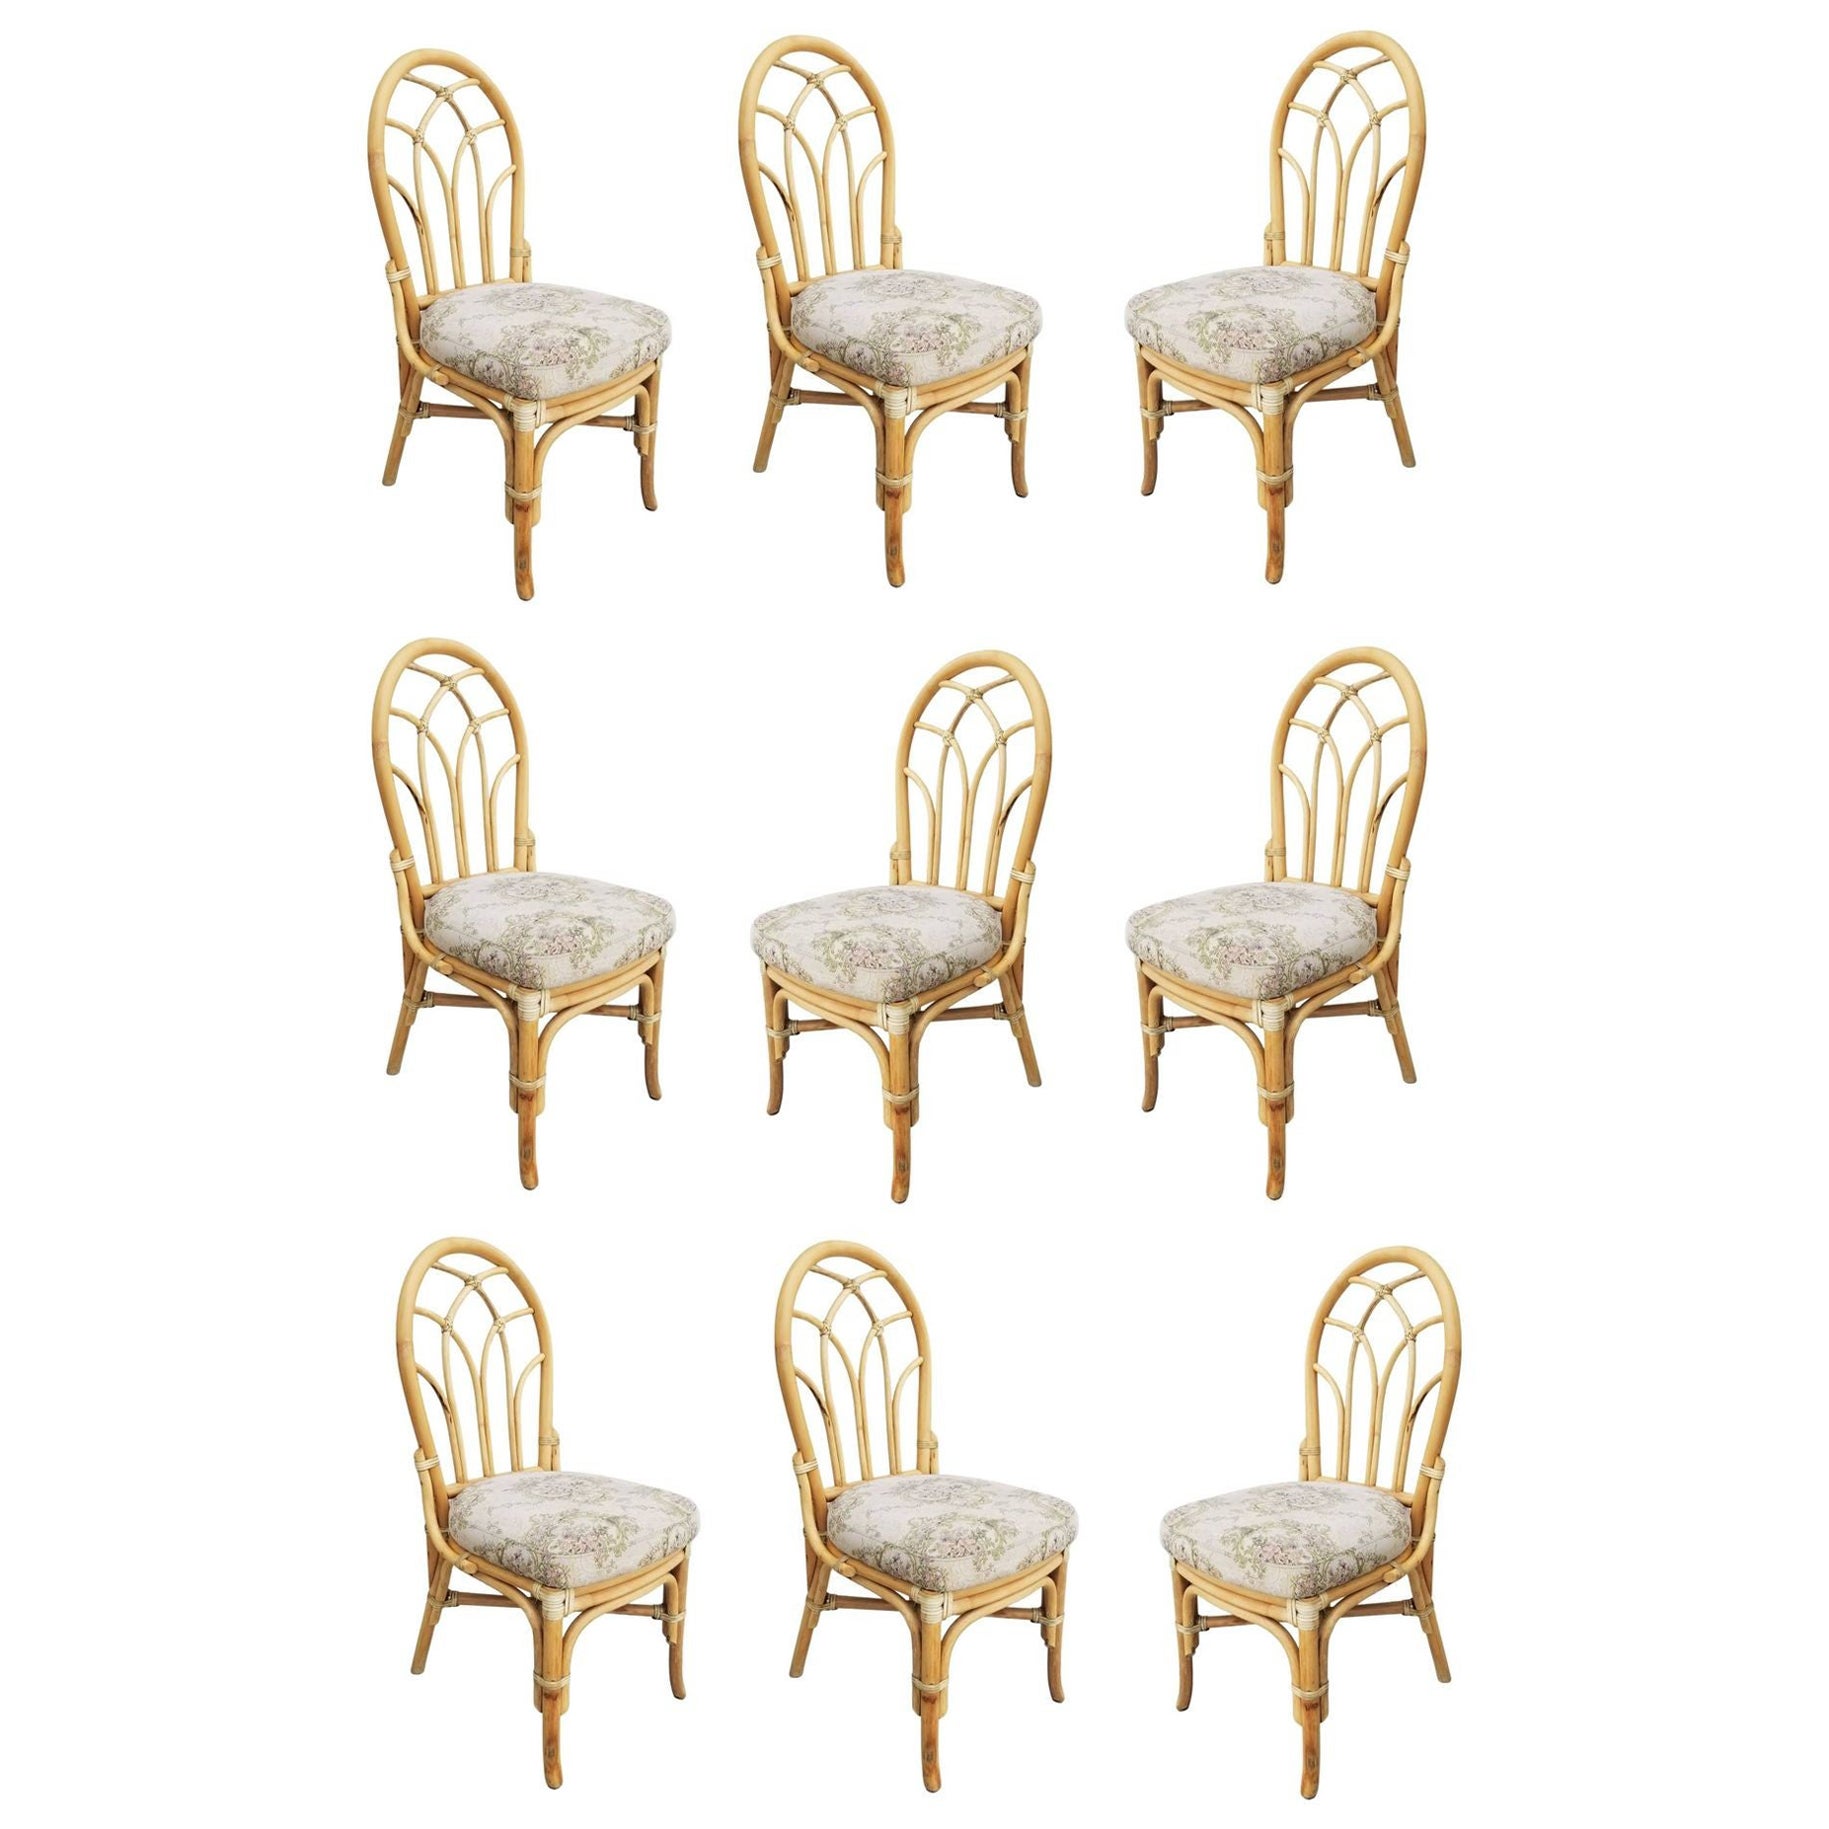 Restored Midcentury 3 Strand Rattan Floral Back Dining Chairs, Set of 9 For Sale